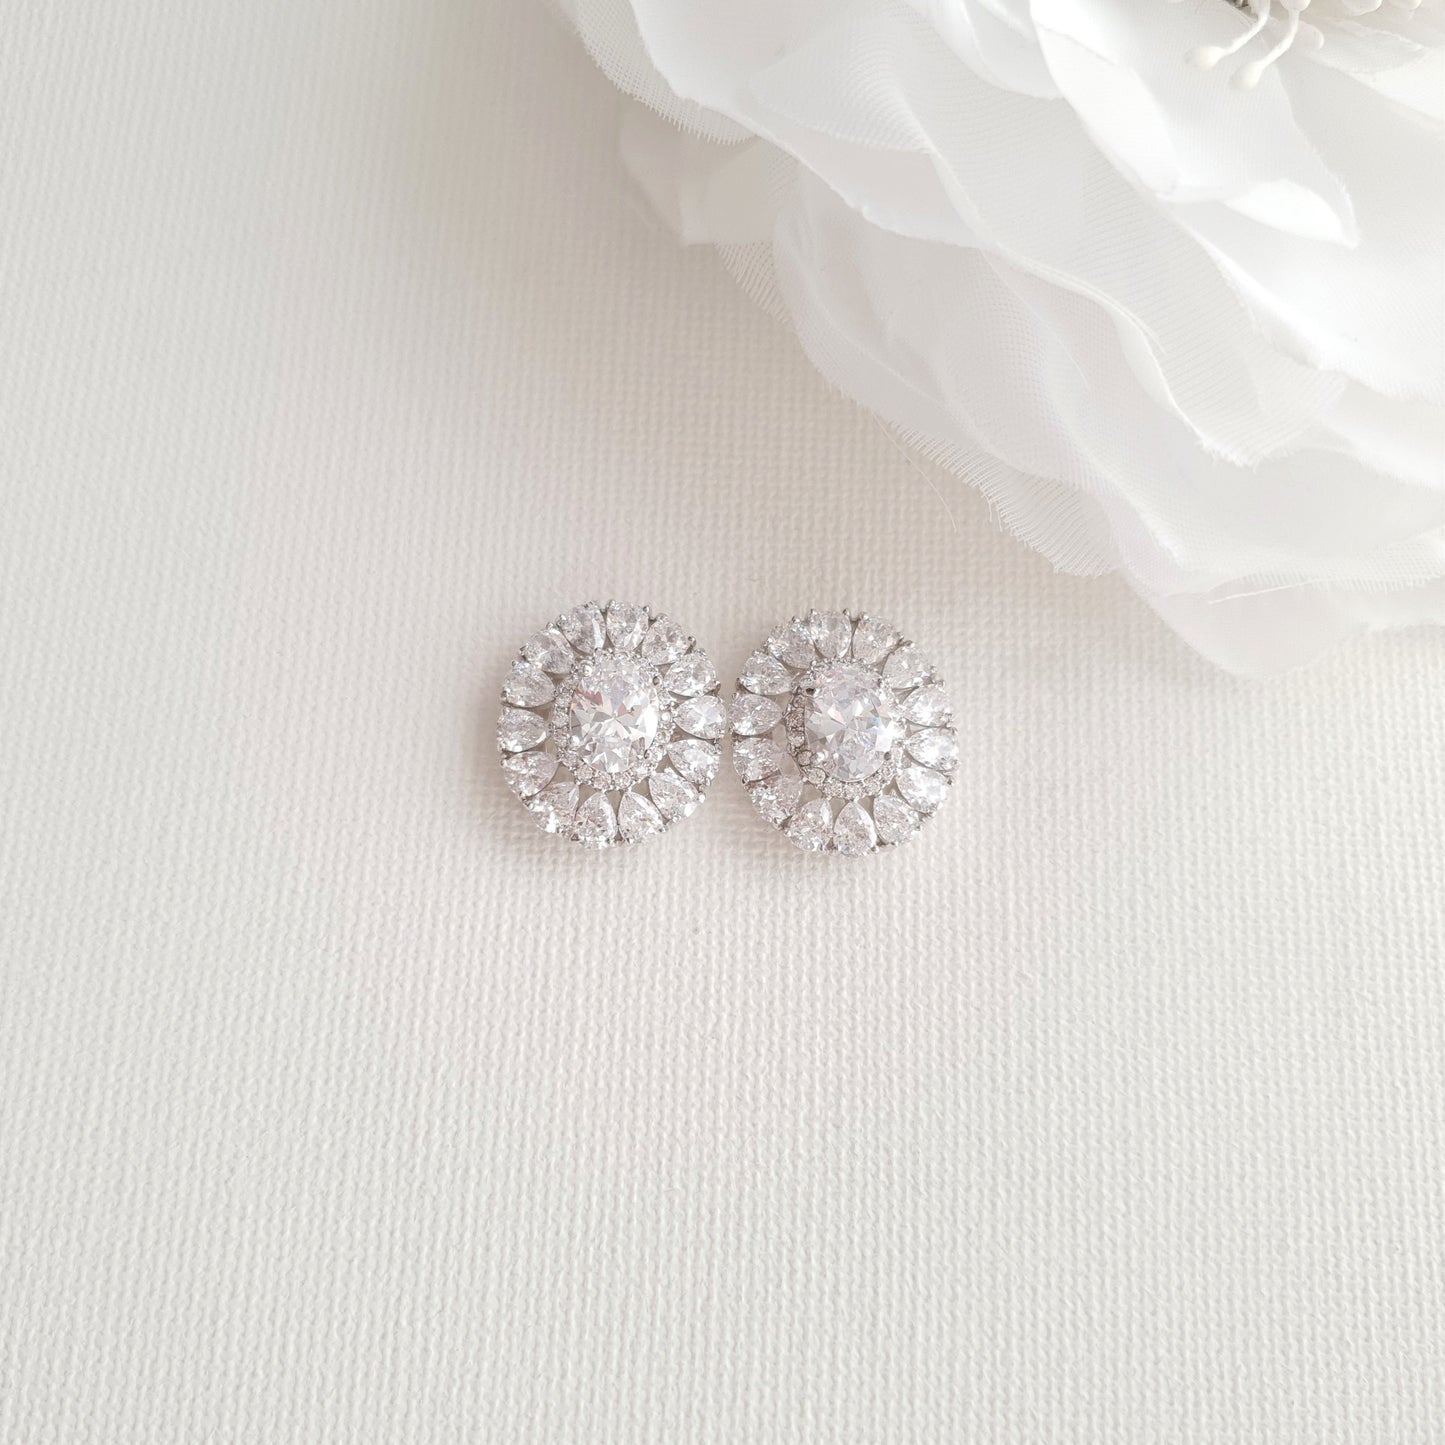 Oval Stud Earrings for Brides-Indigo